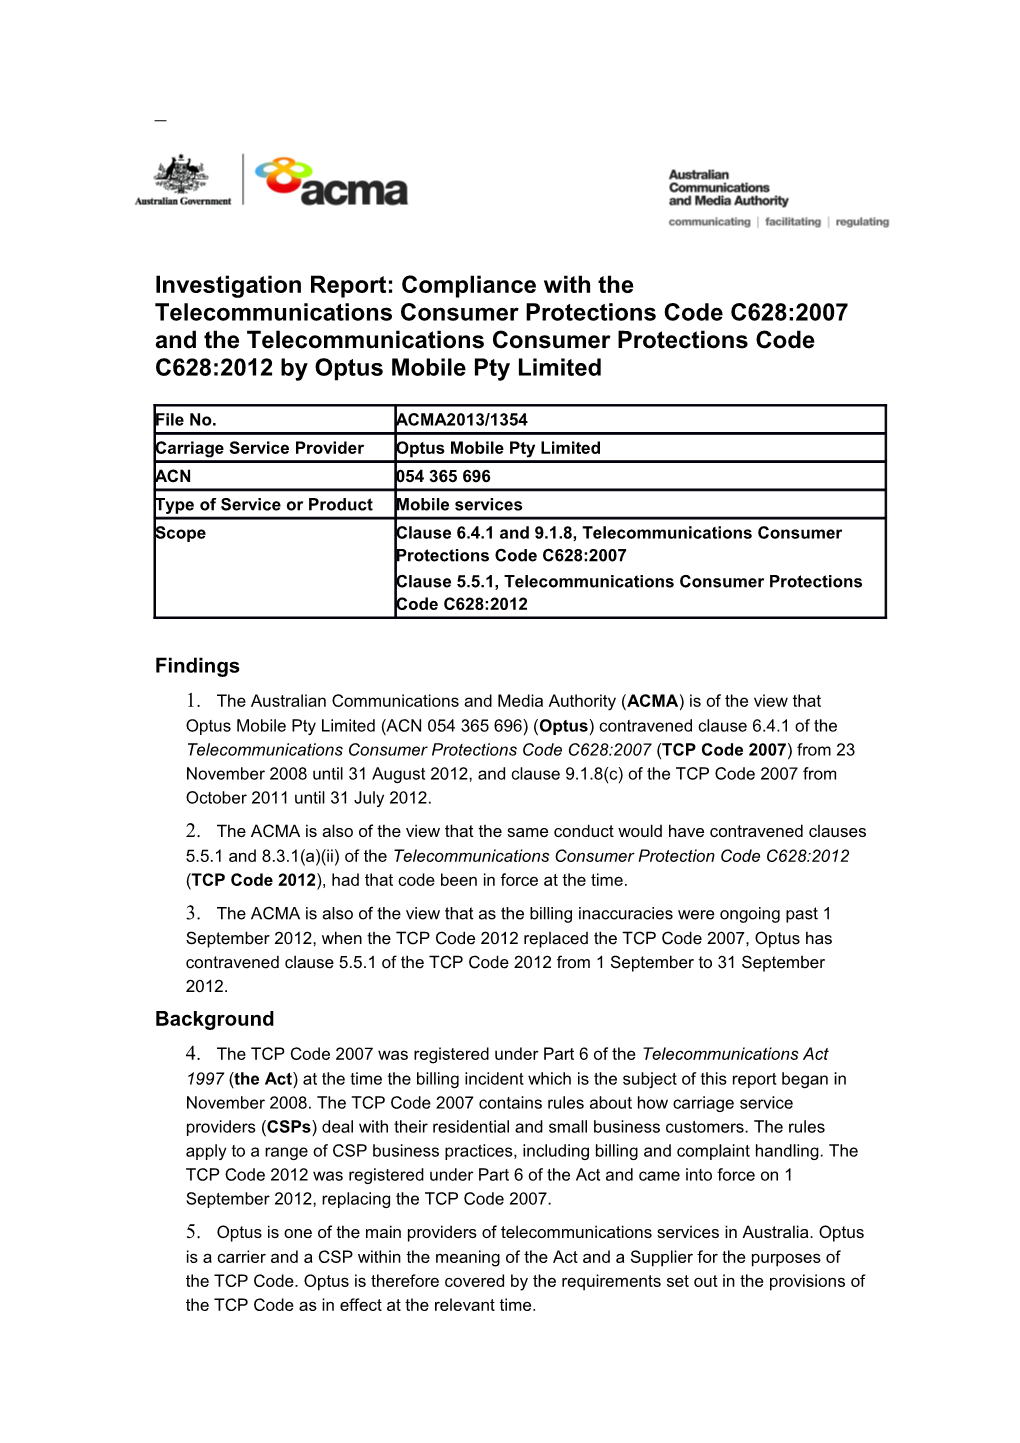 Investigation Report: Compliance with the Telecommunications Consumer Protections Code